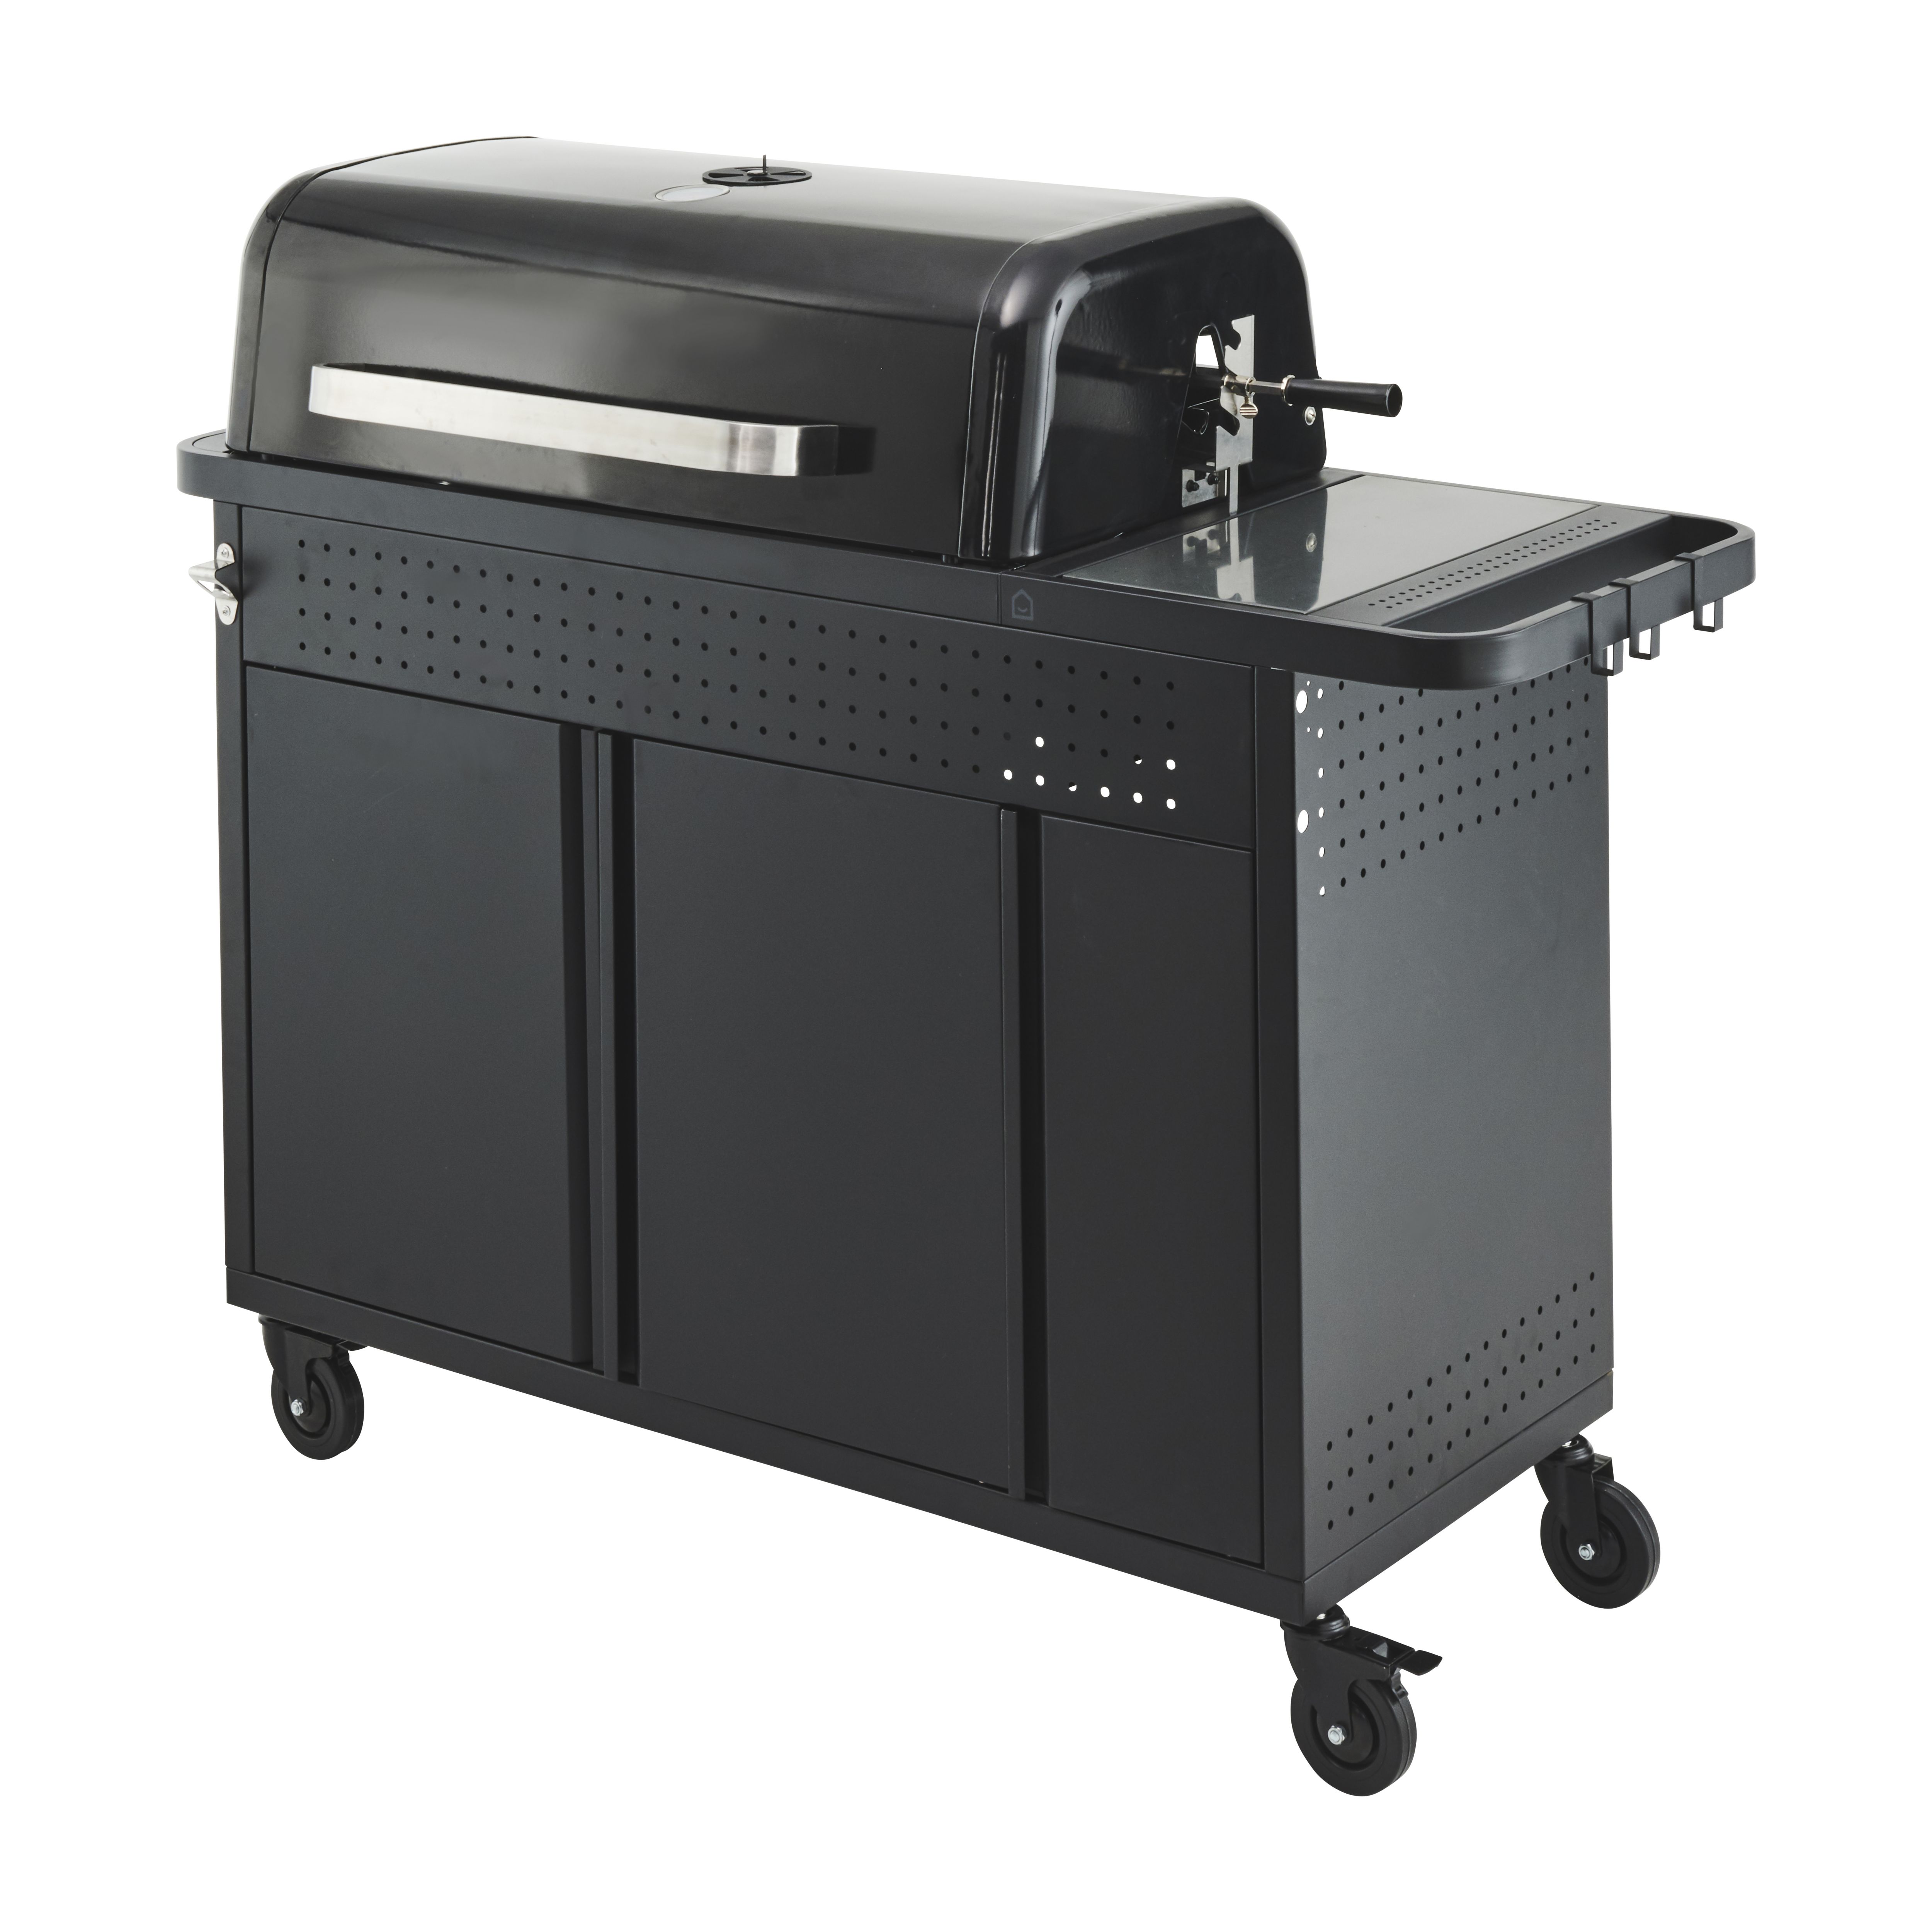 GoodHome Rockwell C410 Black Charcoal Barbecue